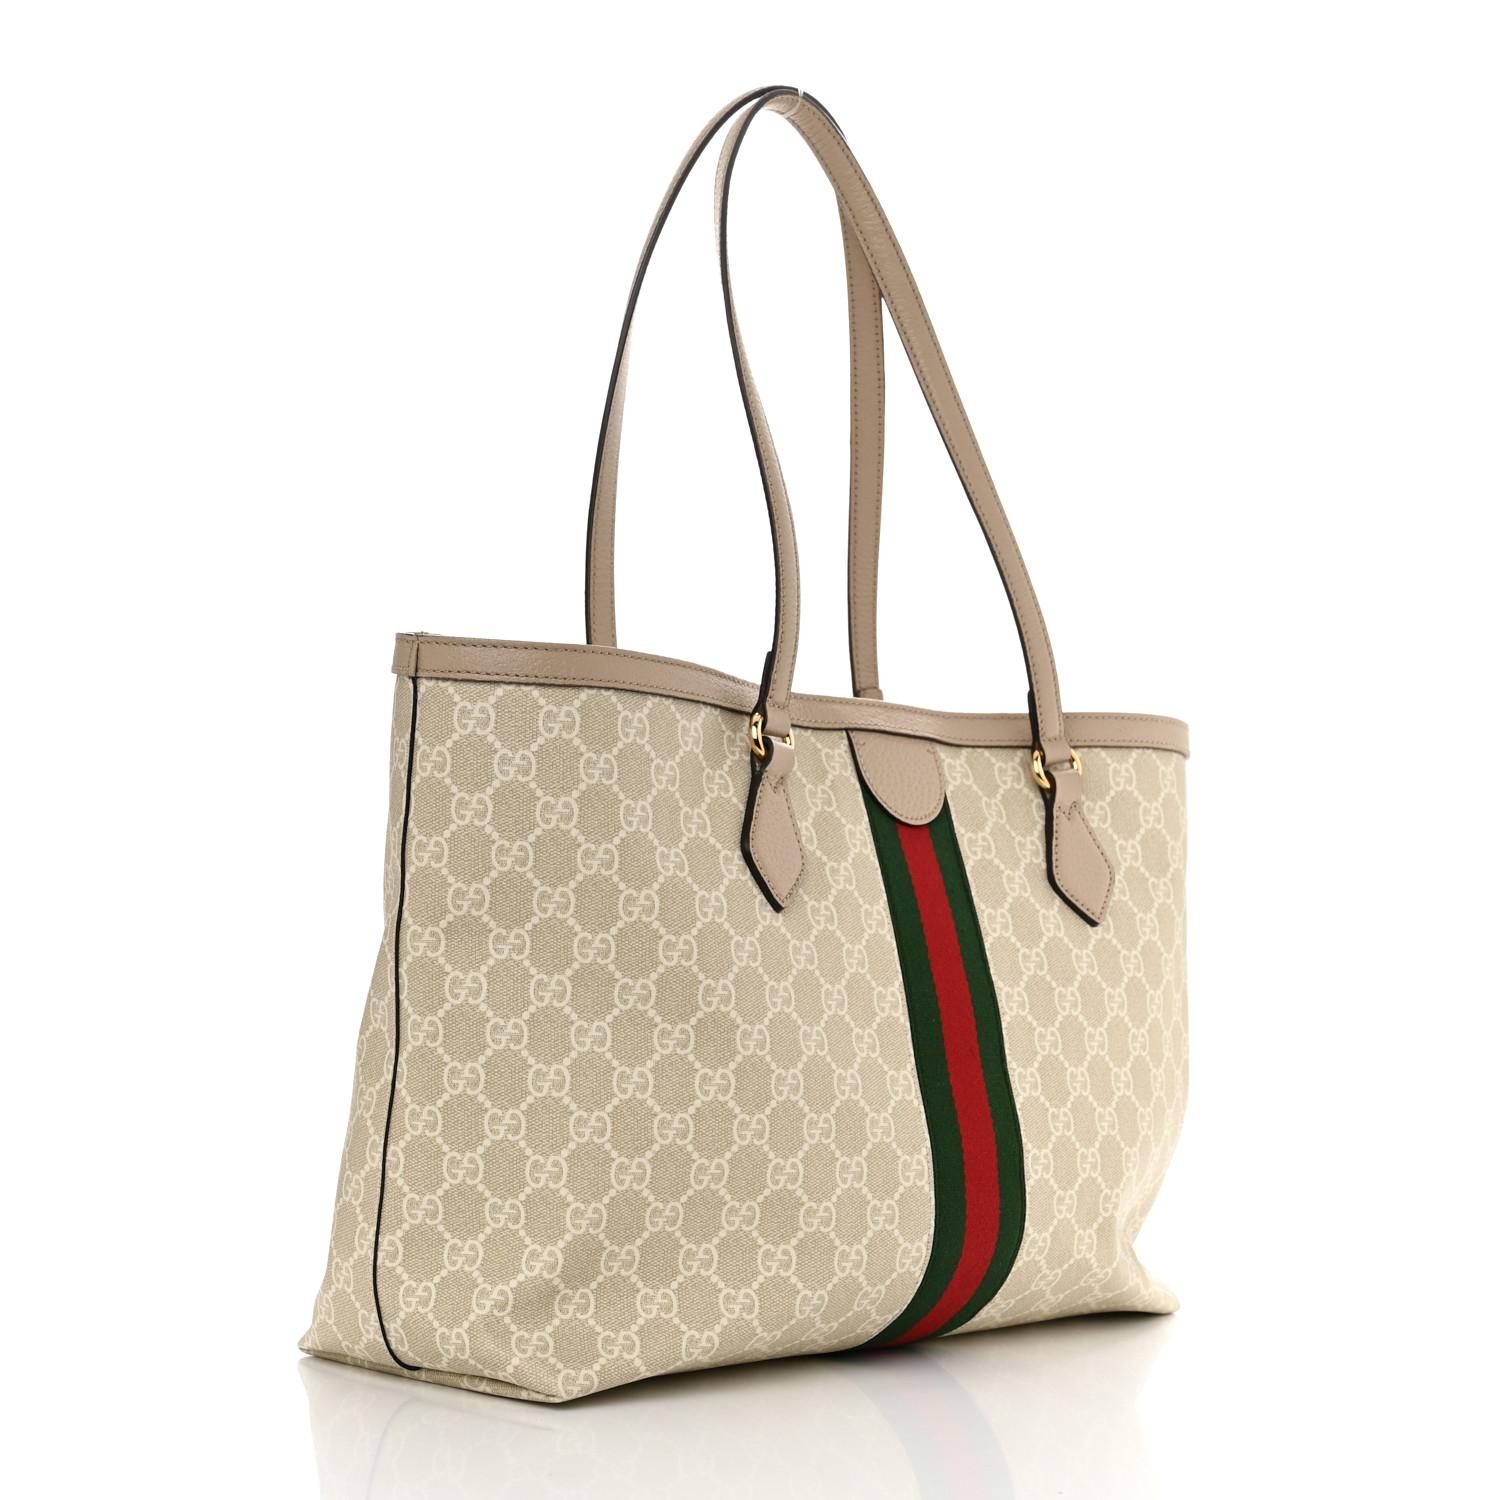 This tote is made of Gucci GG supreme monogram coated canvas with a green and red web stripe detail. The handbag features top leather strap handles with an open top that leads to a beige fabric interior with zipper and patch pockets.

Color: